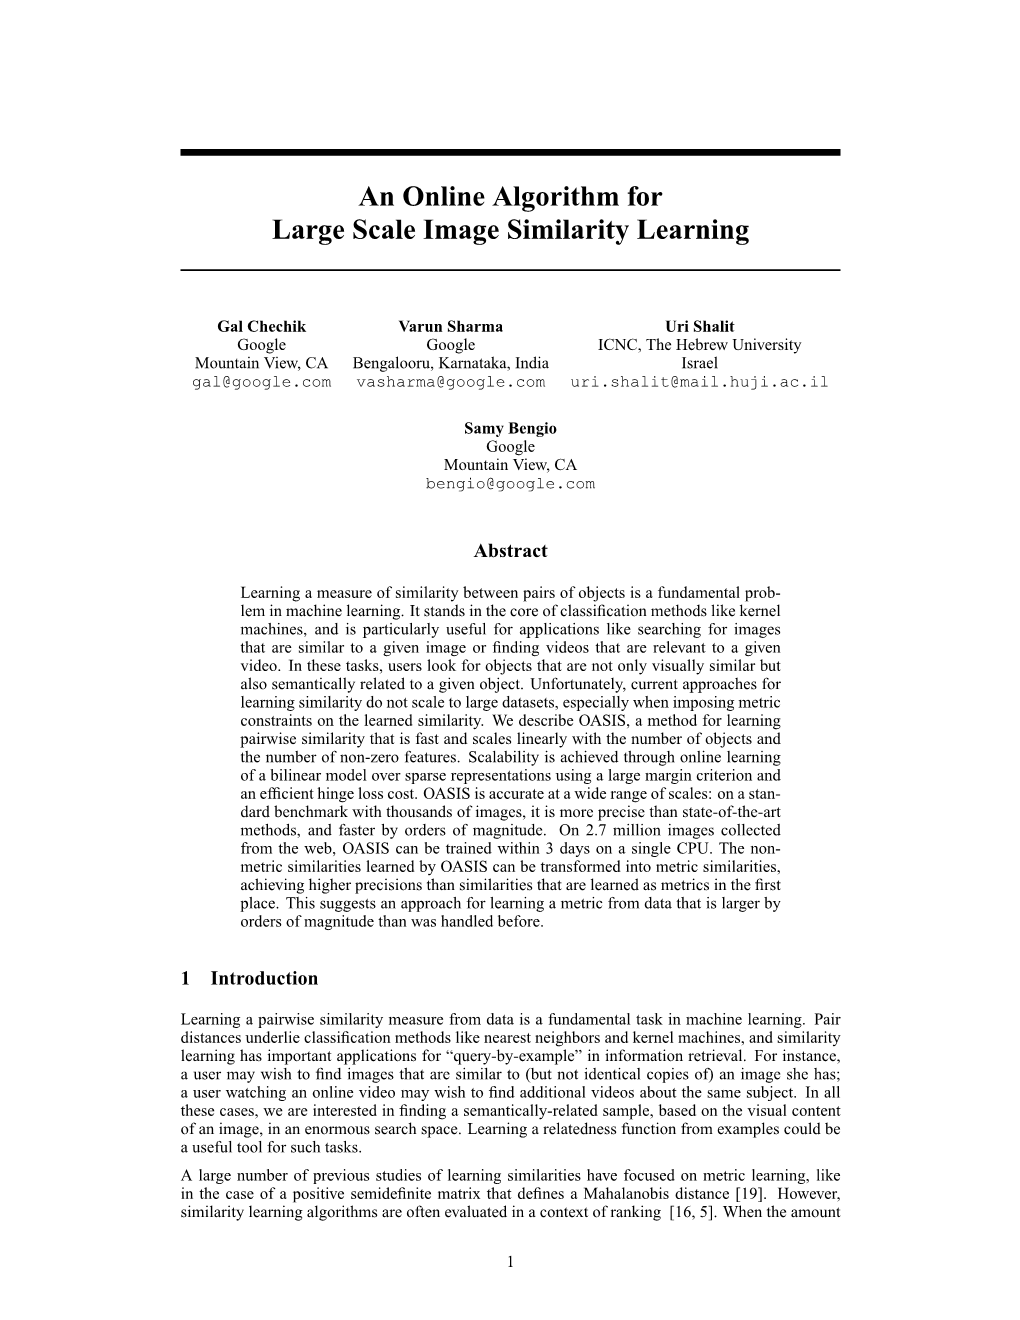 An Online Algorithm for Large Scale Image Similarity Learning